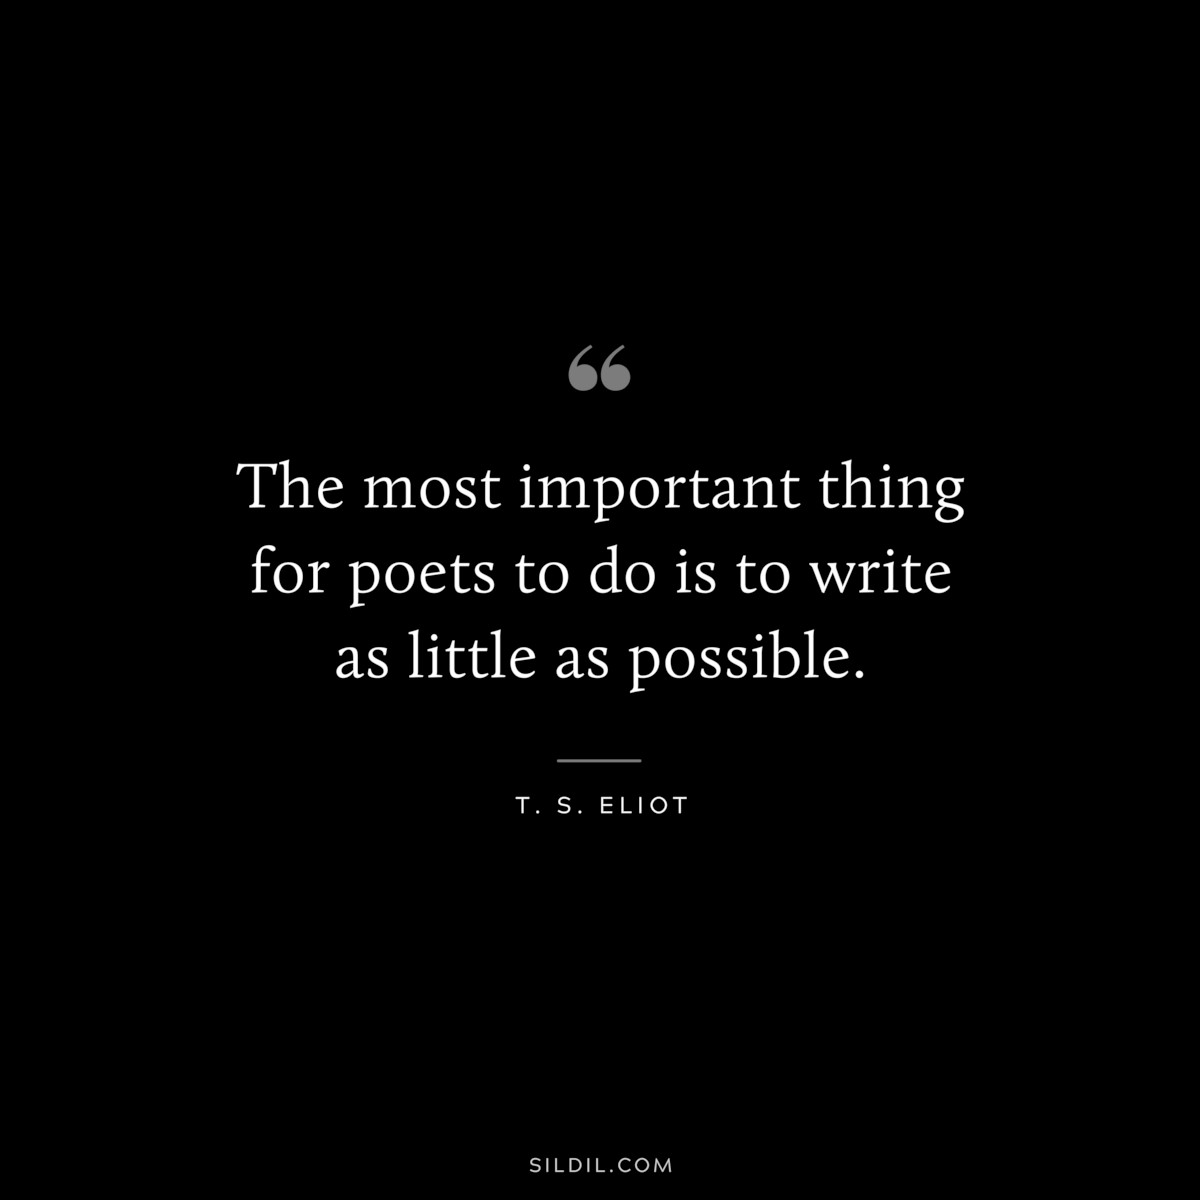 The most important thing for poets to do is to write as little as possible. ― T. S. Eliot